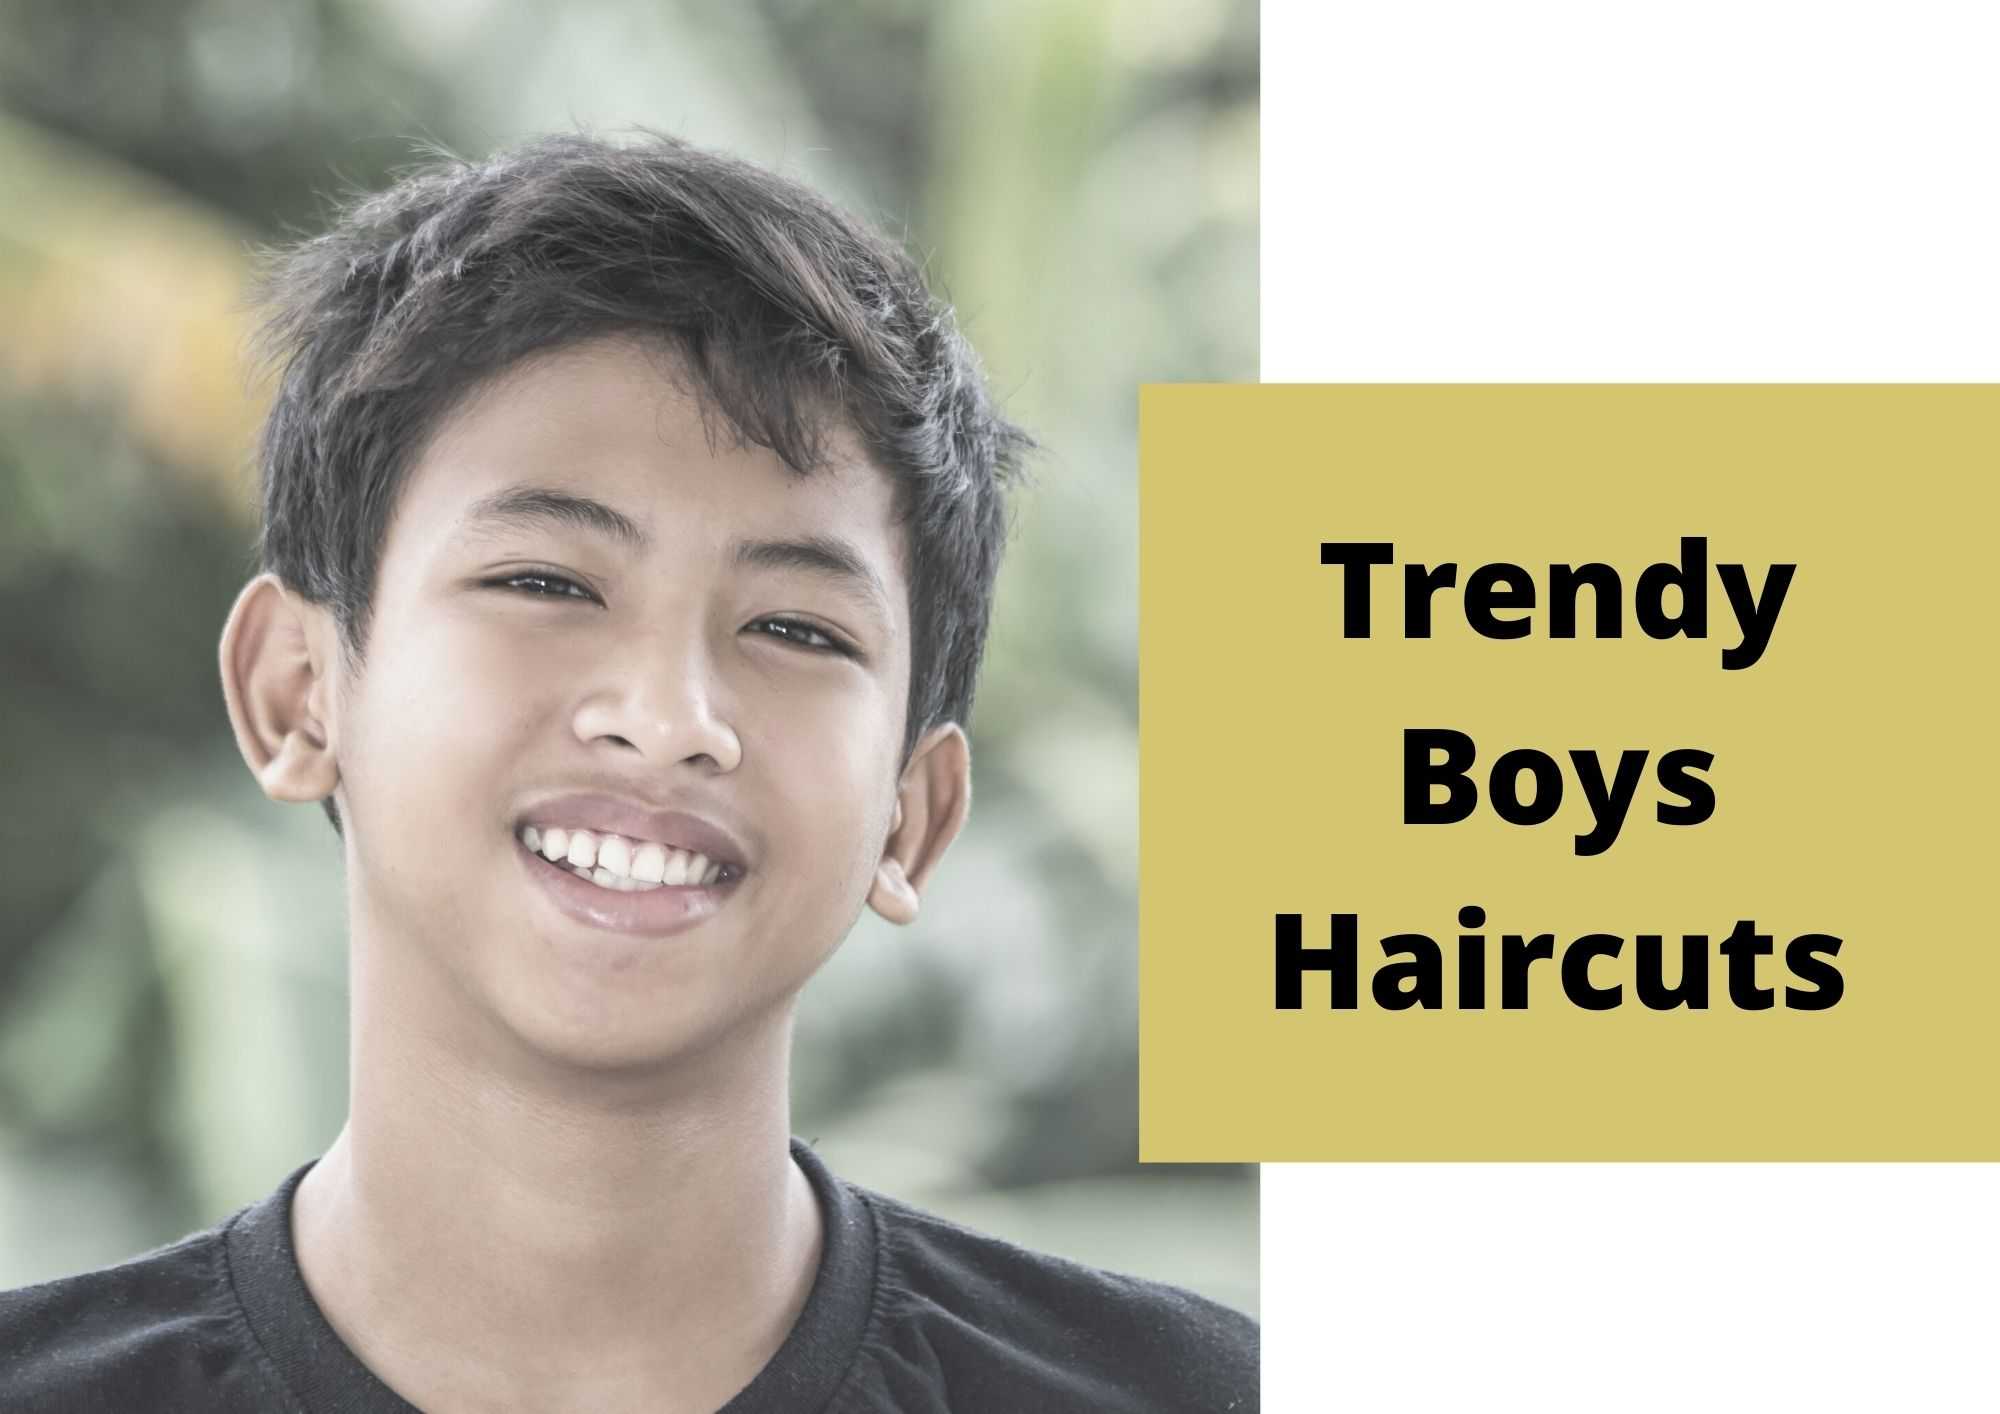 12 Latest and Popular Haircuts for School Boys | Styles At Life